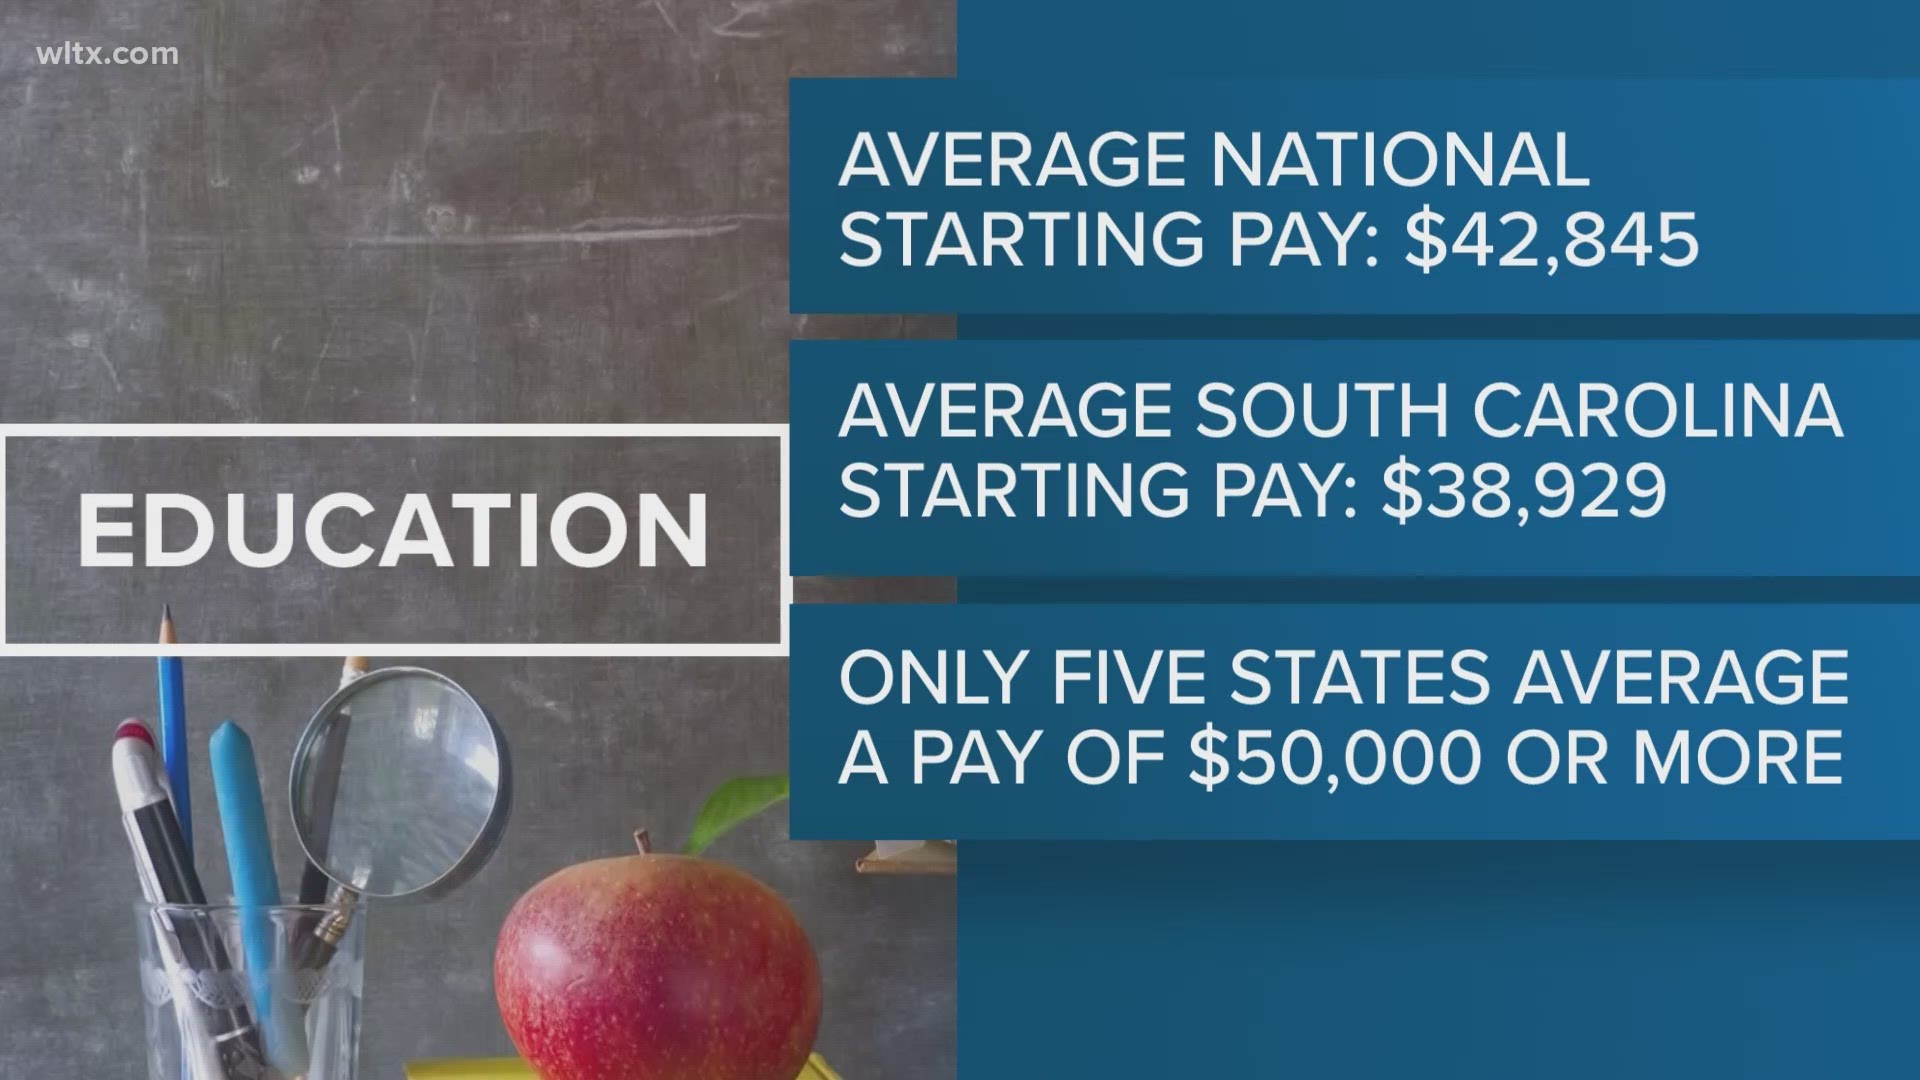 A new report from the National Education Association says teachers in the Carolinas have the lowest salaries in the country.